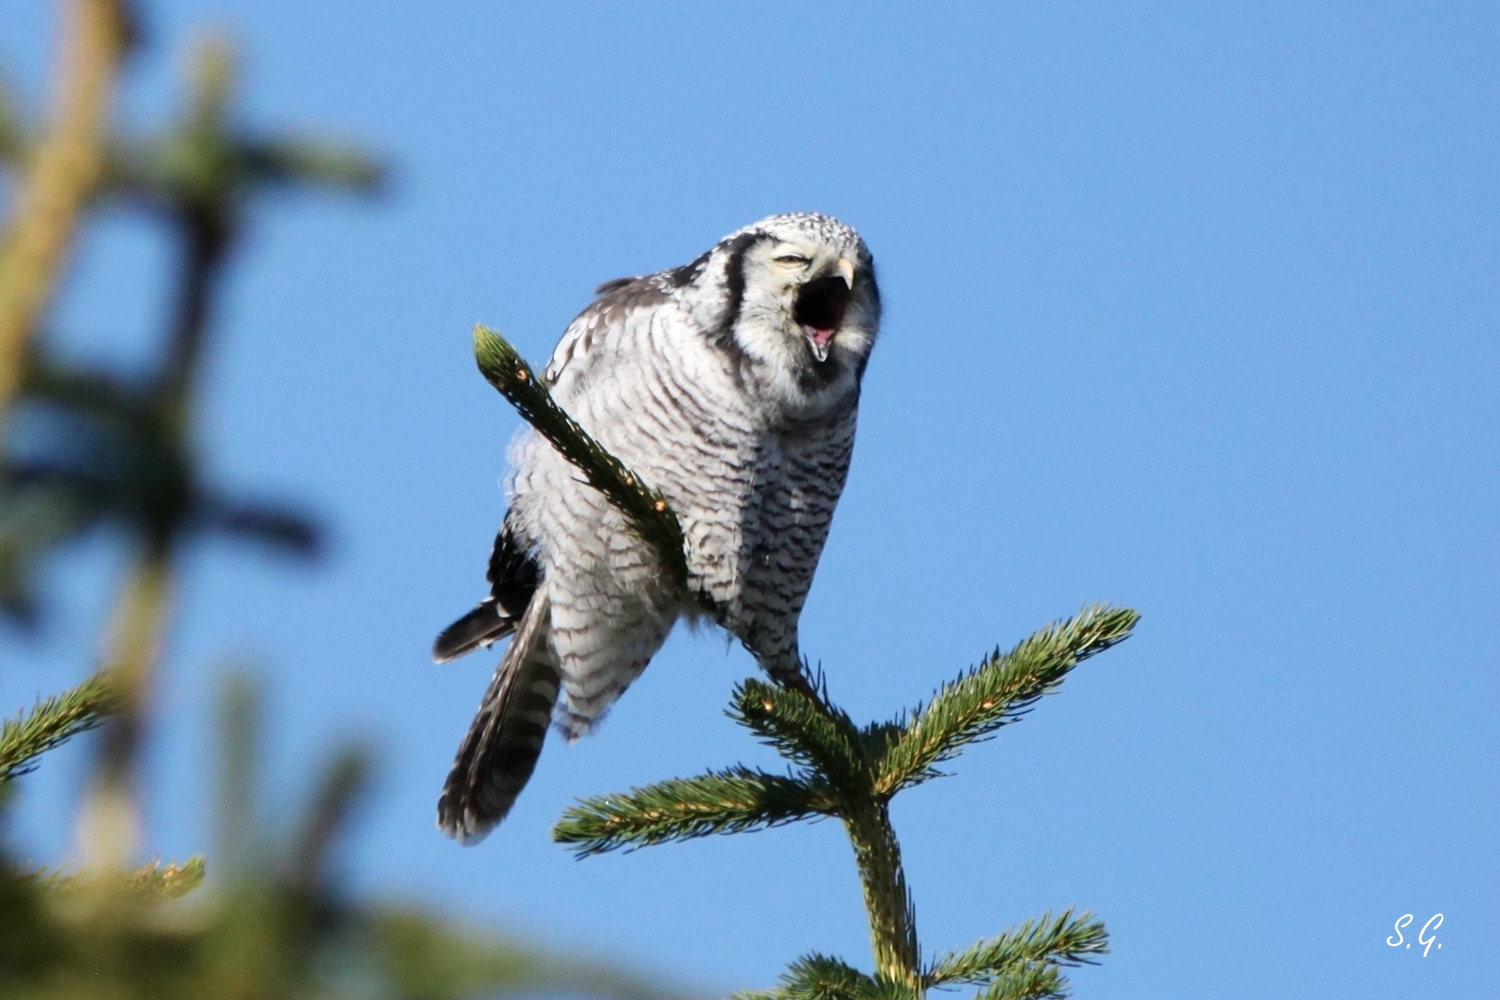 A laughing Northern hawk owl